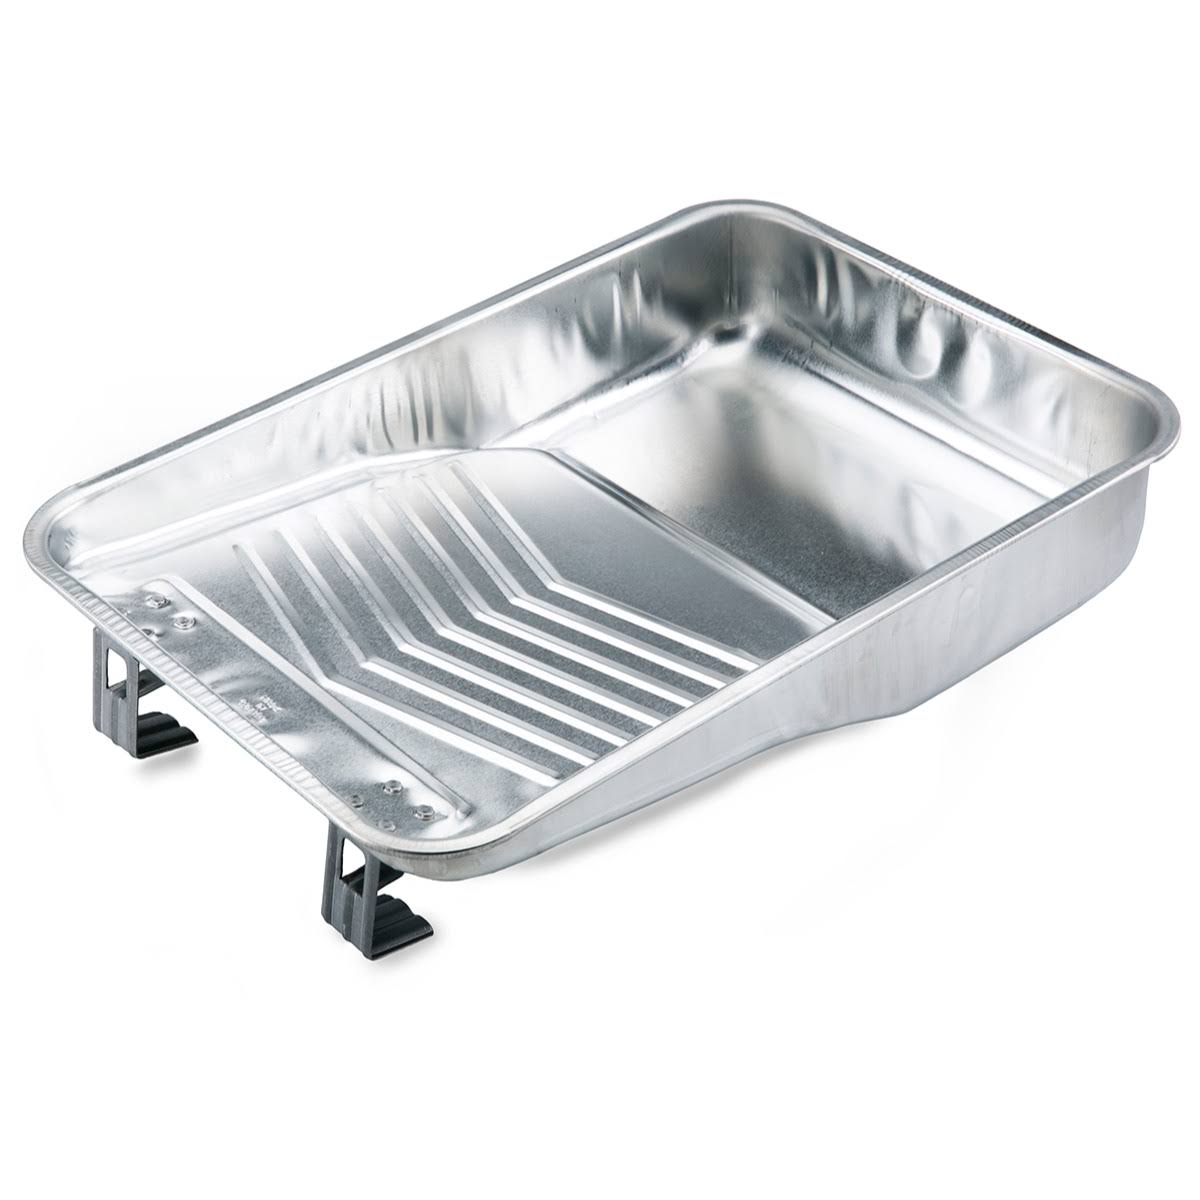 Shur-Line Deep-Well Paint Tray, 9.5-In. -1891653